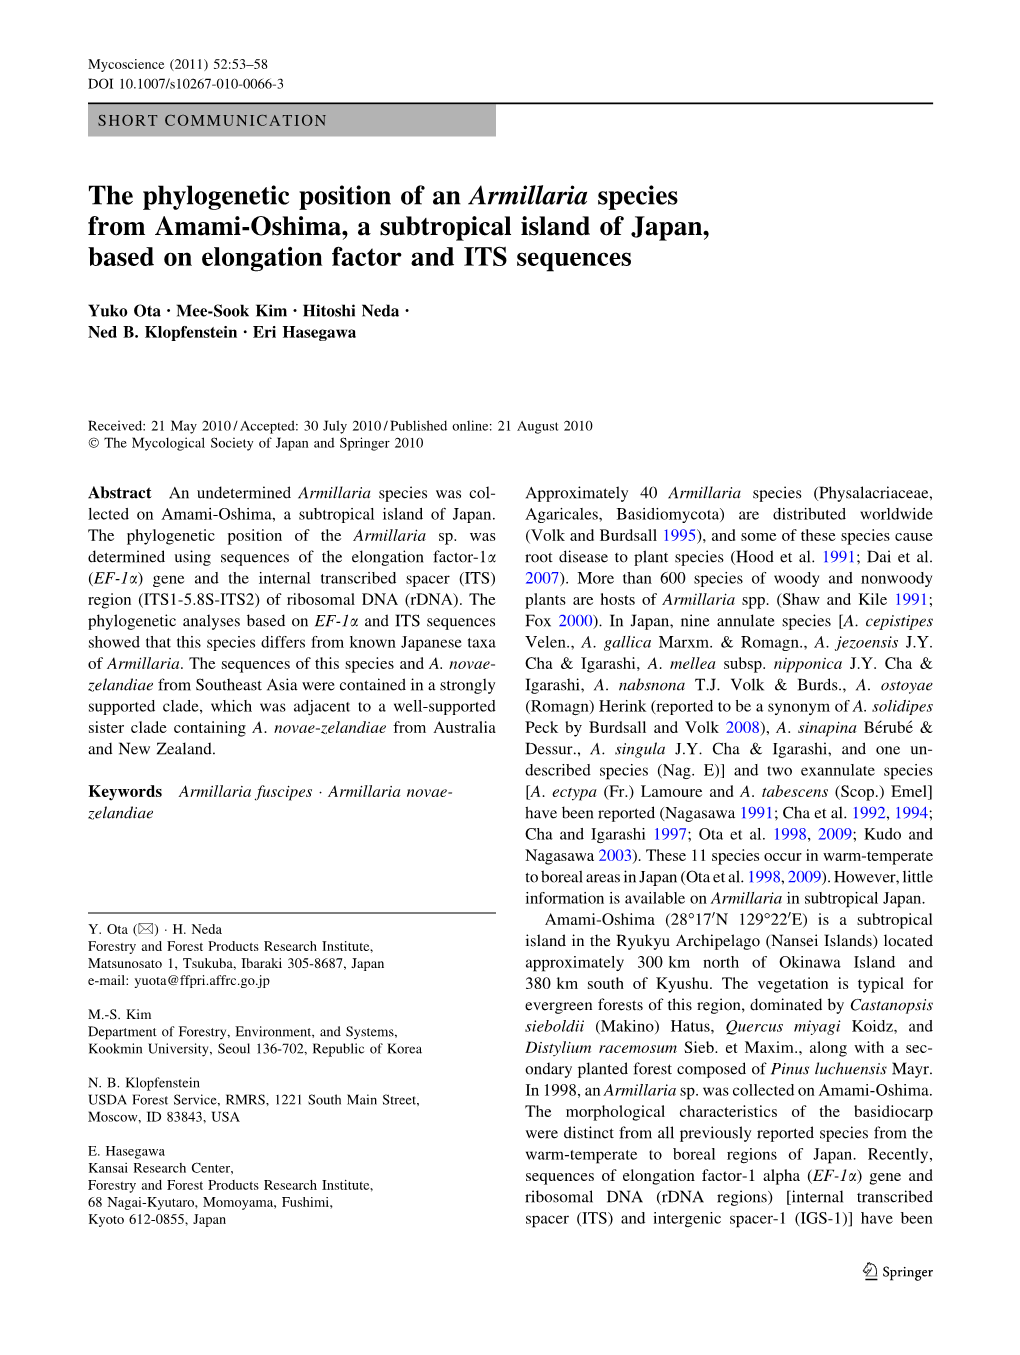 The Phylogenetic Position of an Armillaria Species from Amami-Oshima, a Subtropical Island of Japan, Based on Elongation Factor and ITS Sequences